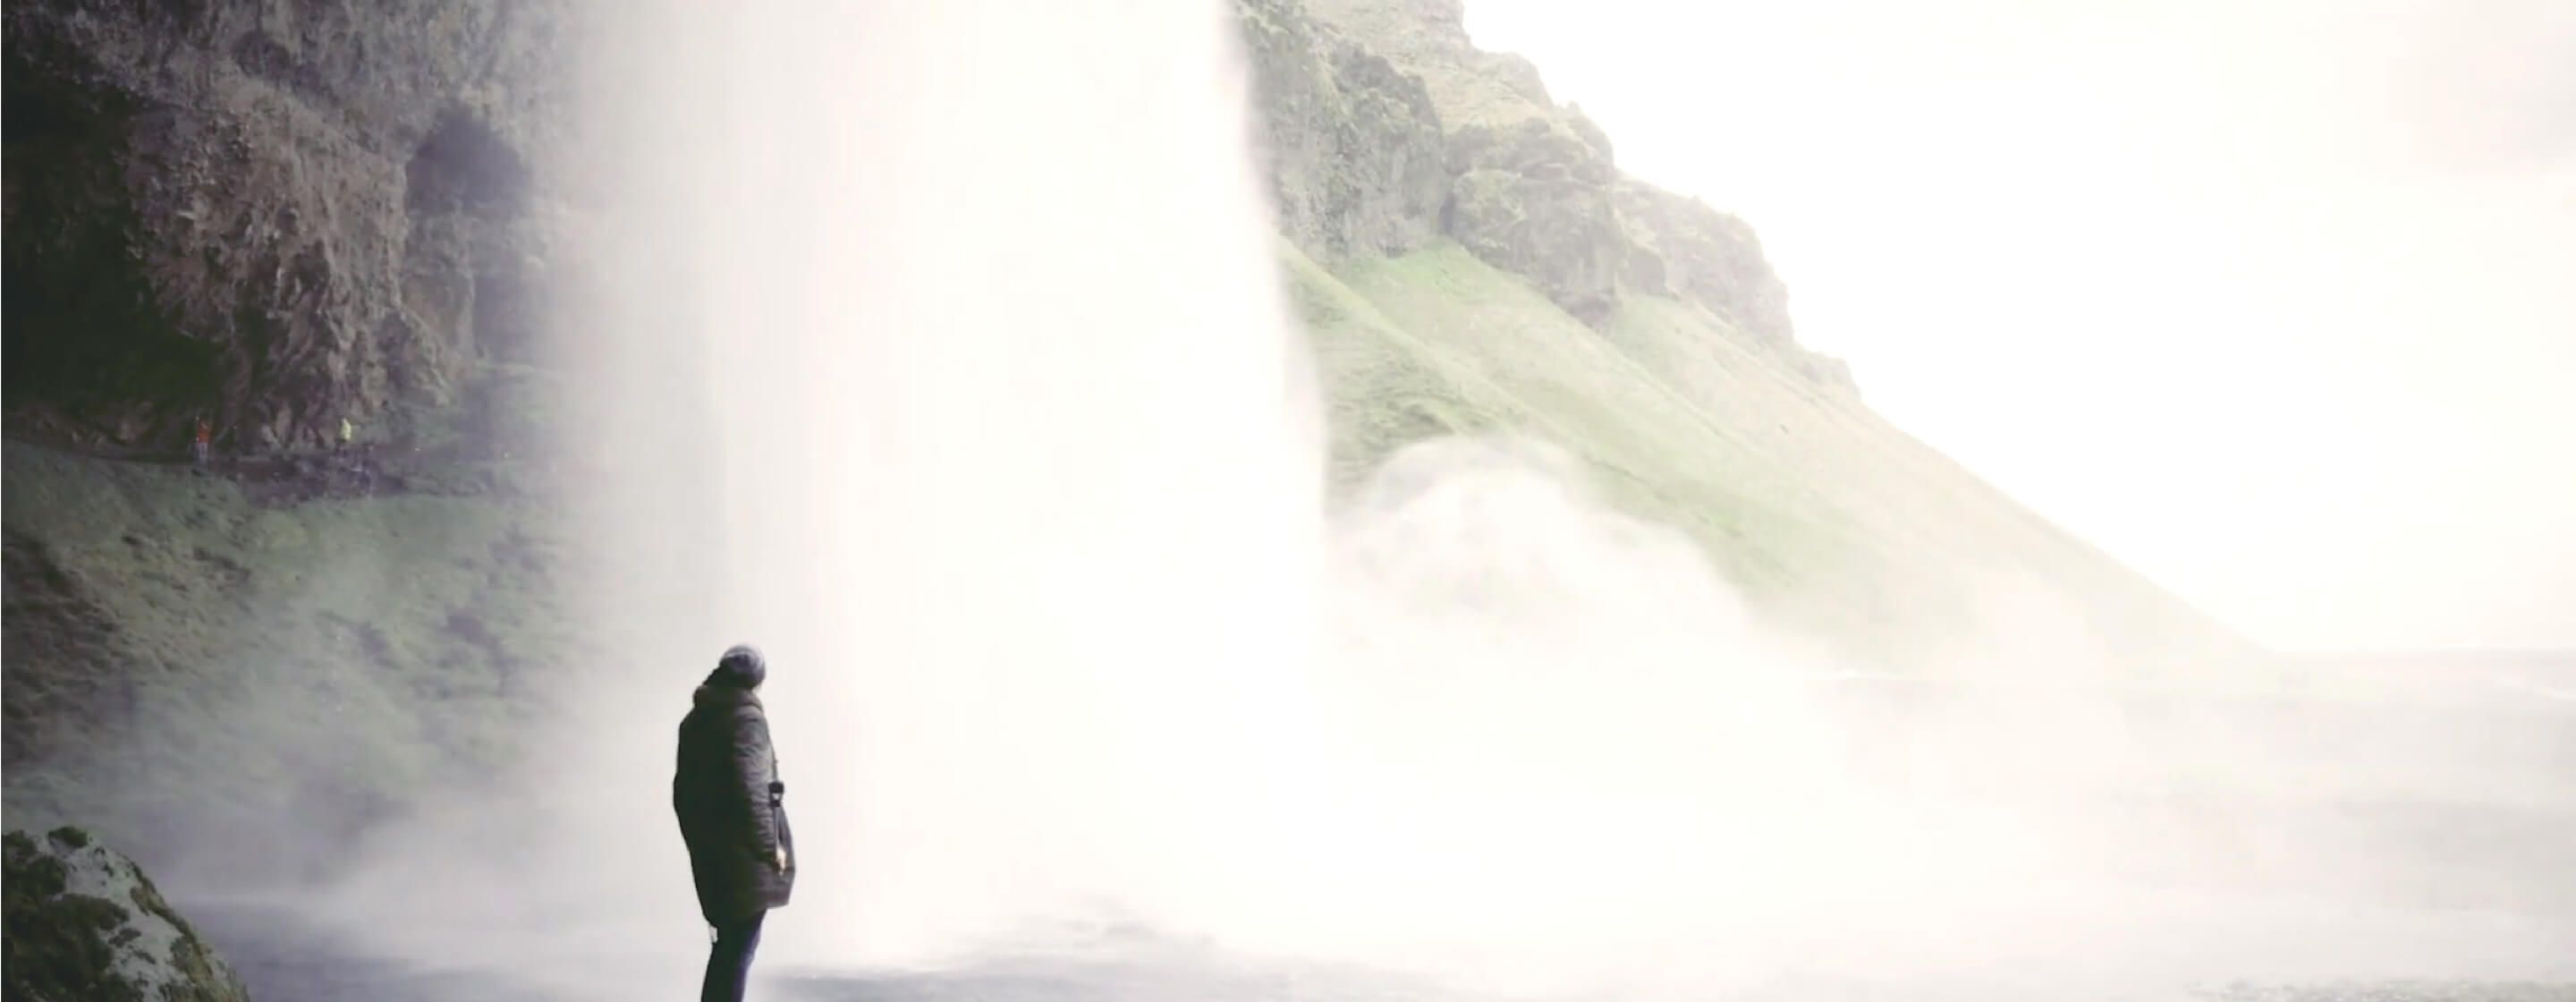 Person in a coat standing next to a massive cascading waterfall with rocks and green hills behind